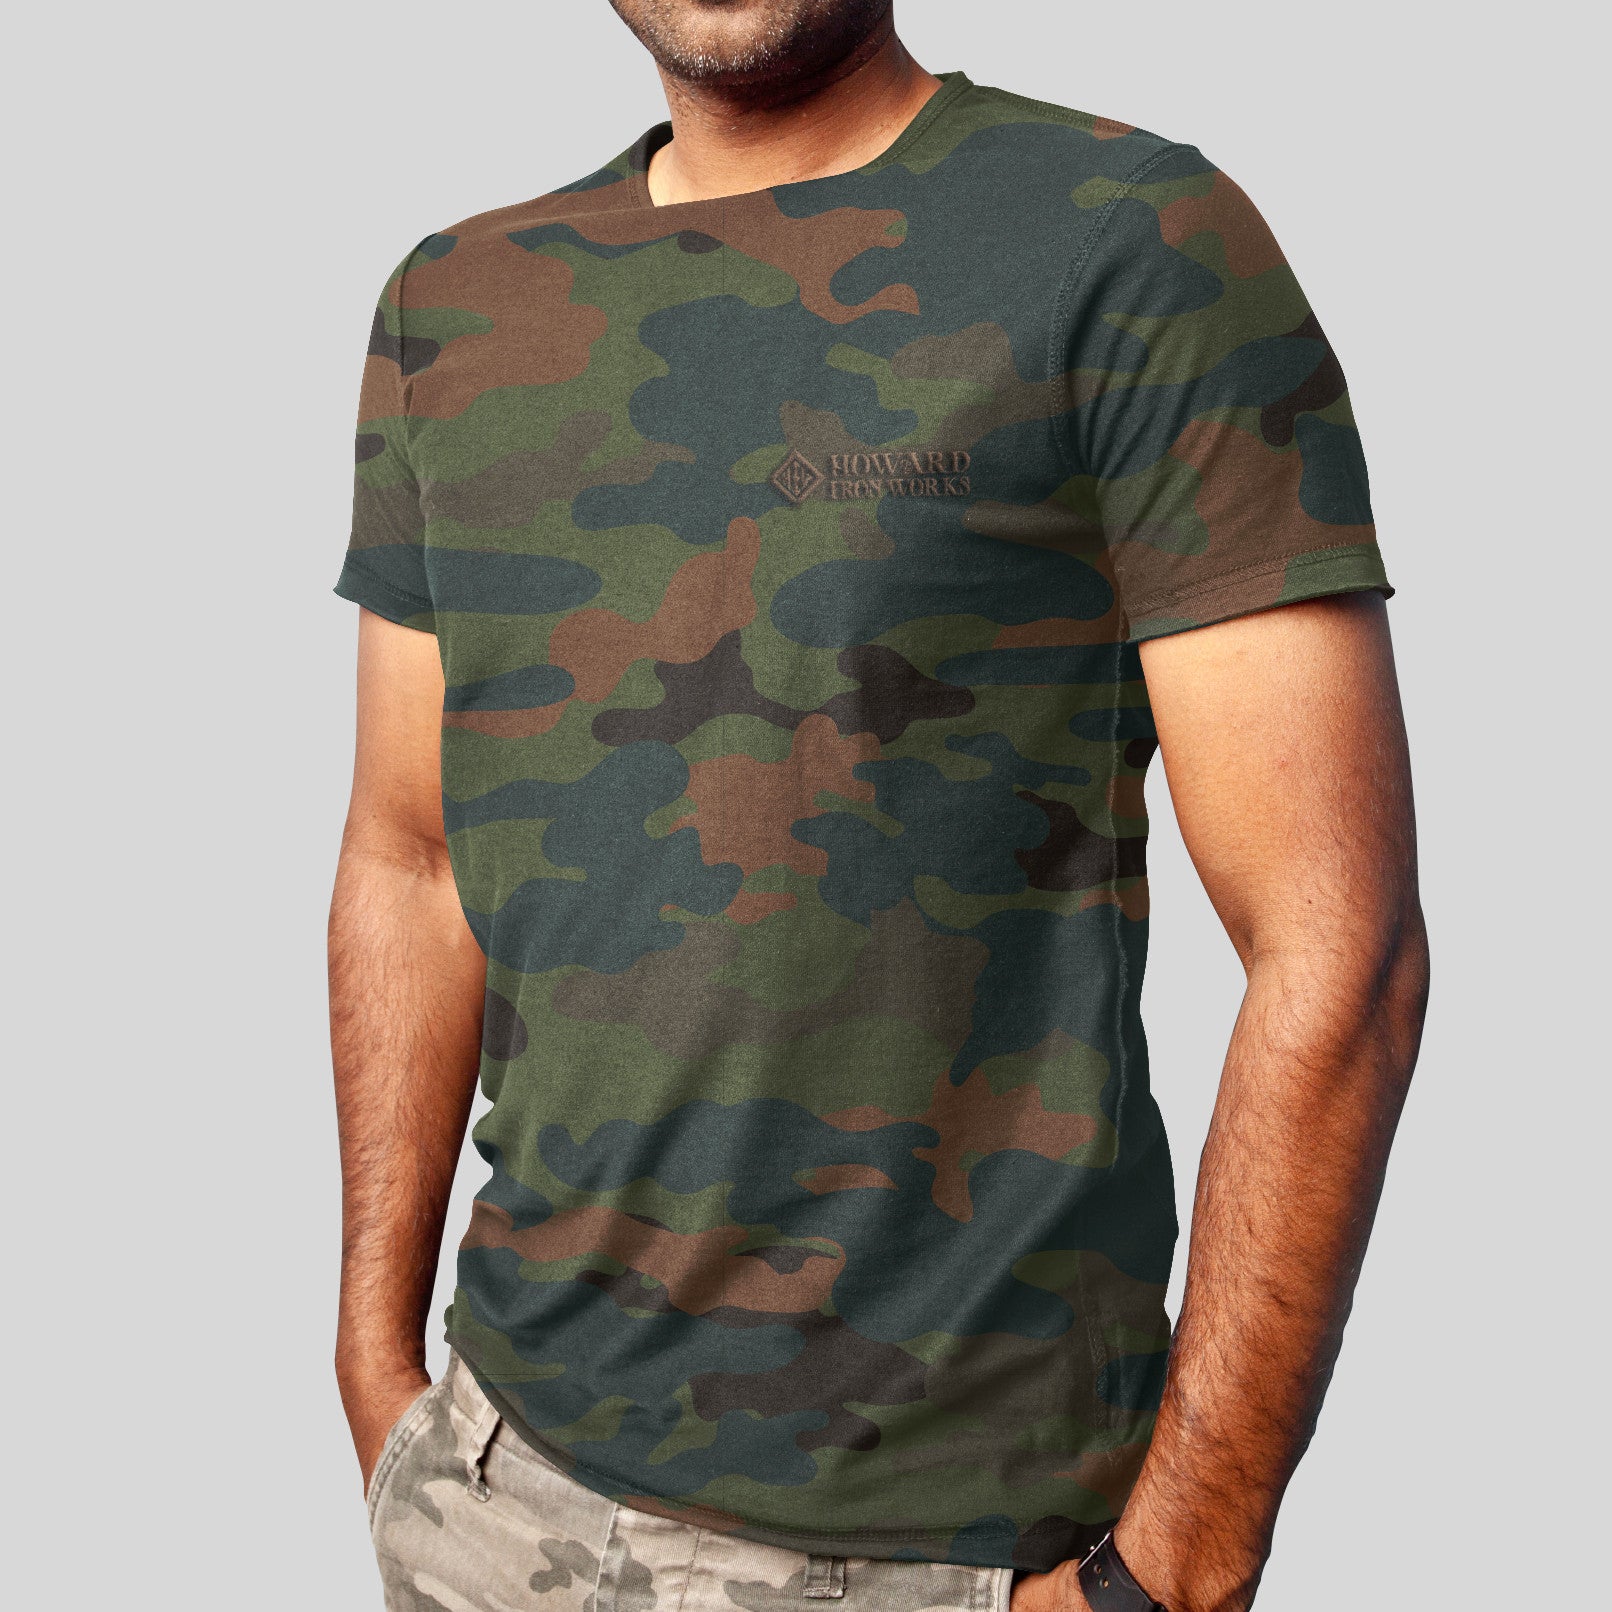 Men's T-Shirt, Short Sleeve, Green Camo - from Howard Iron Works Printing Museum